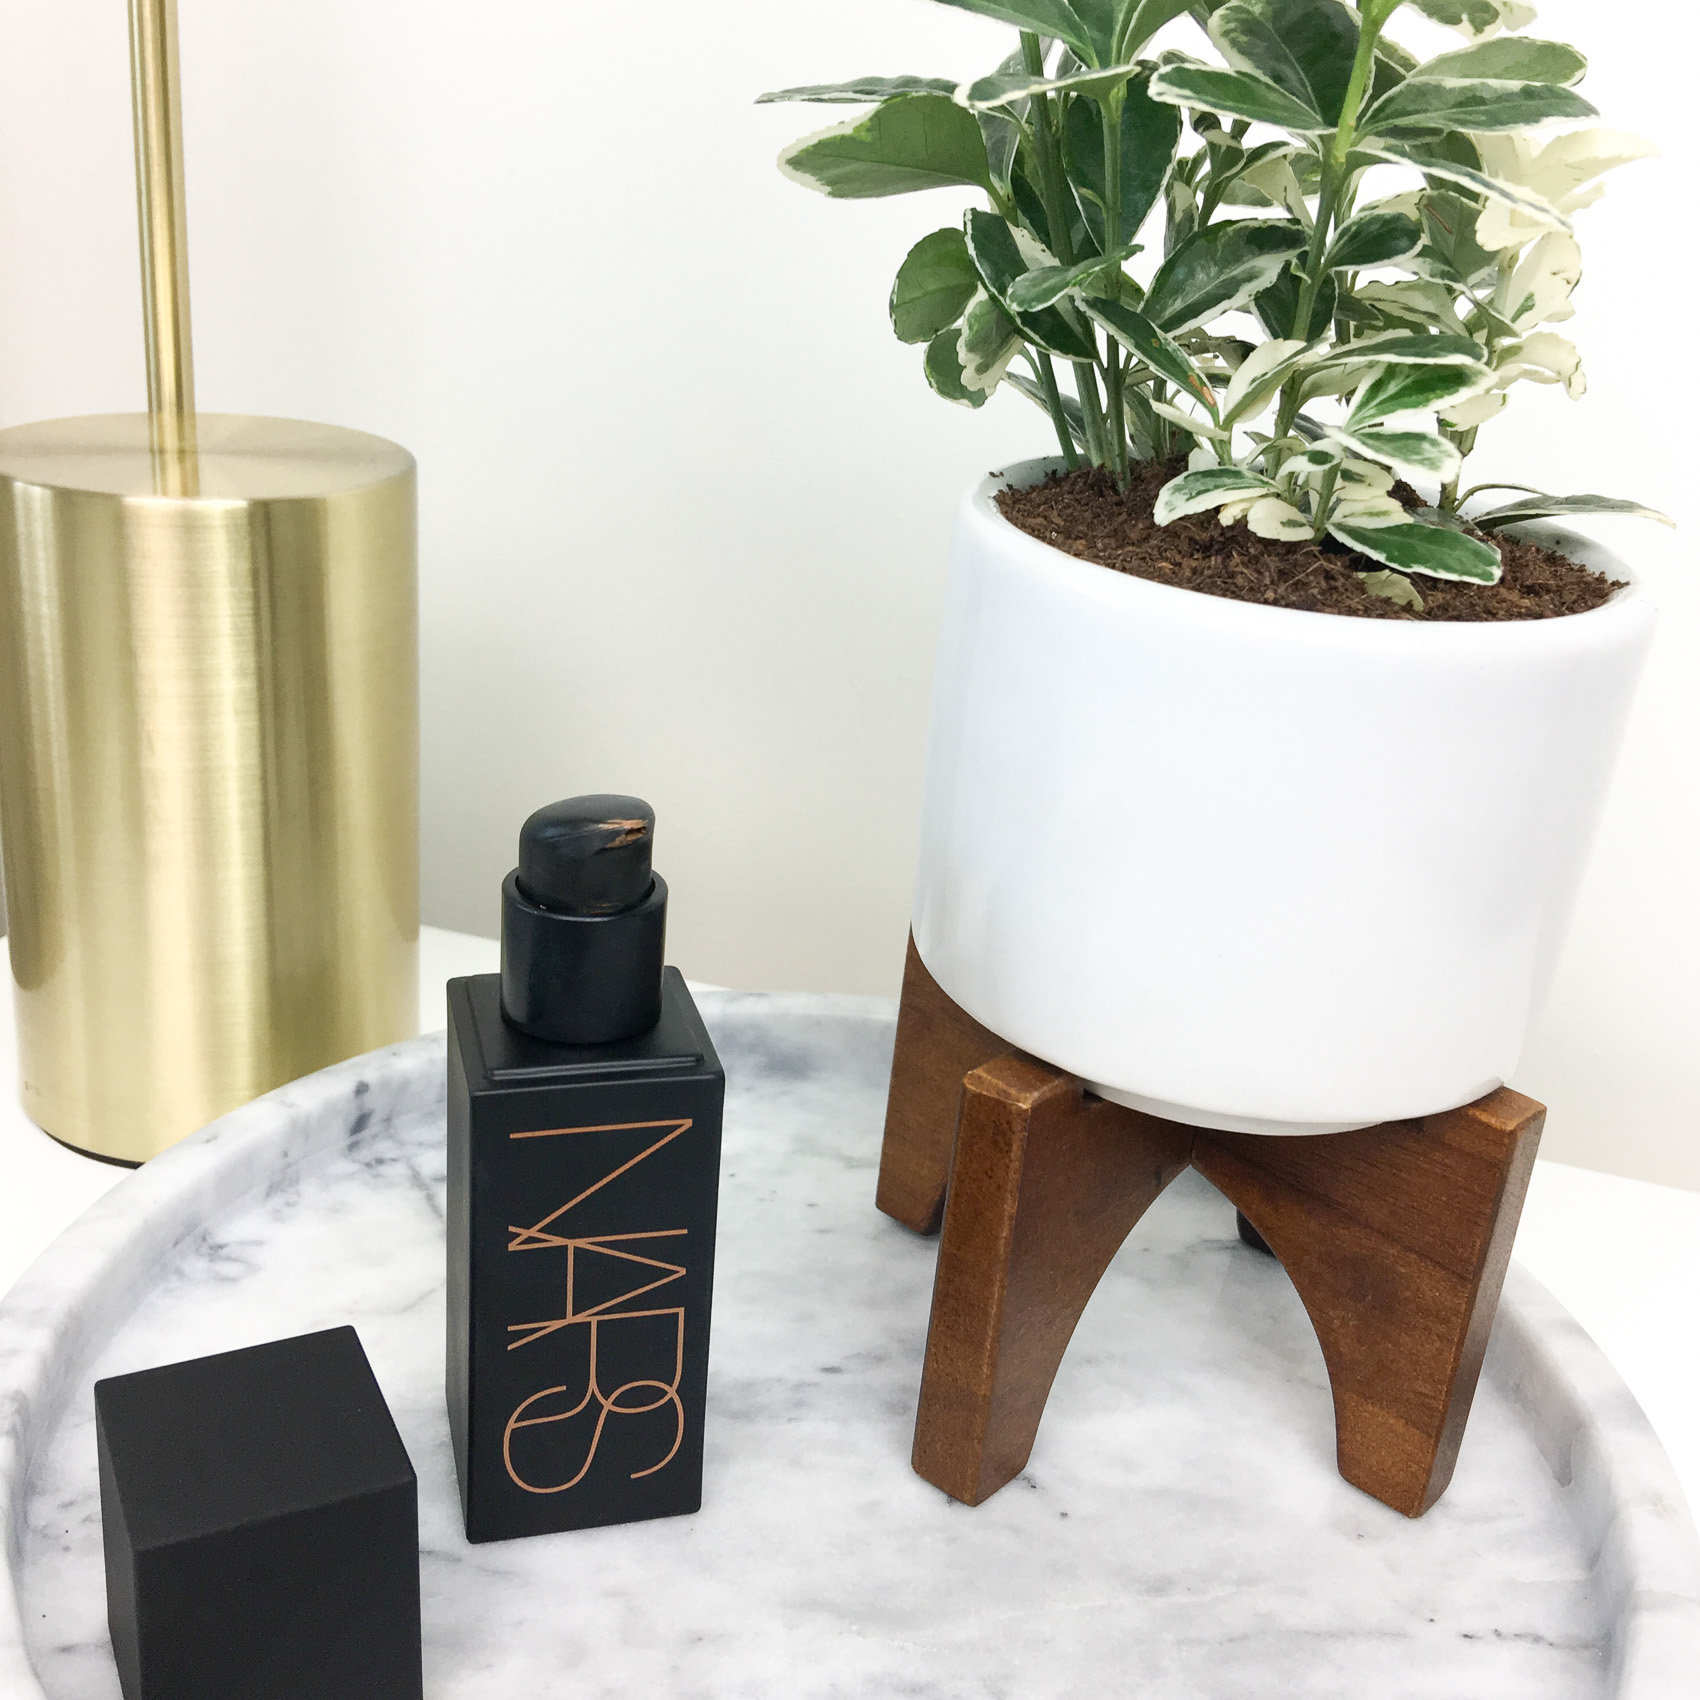 Check out my review of the NARS Laguna Bronzer and NARS St Moritz Moisturiser